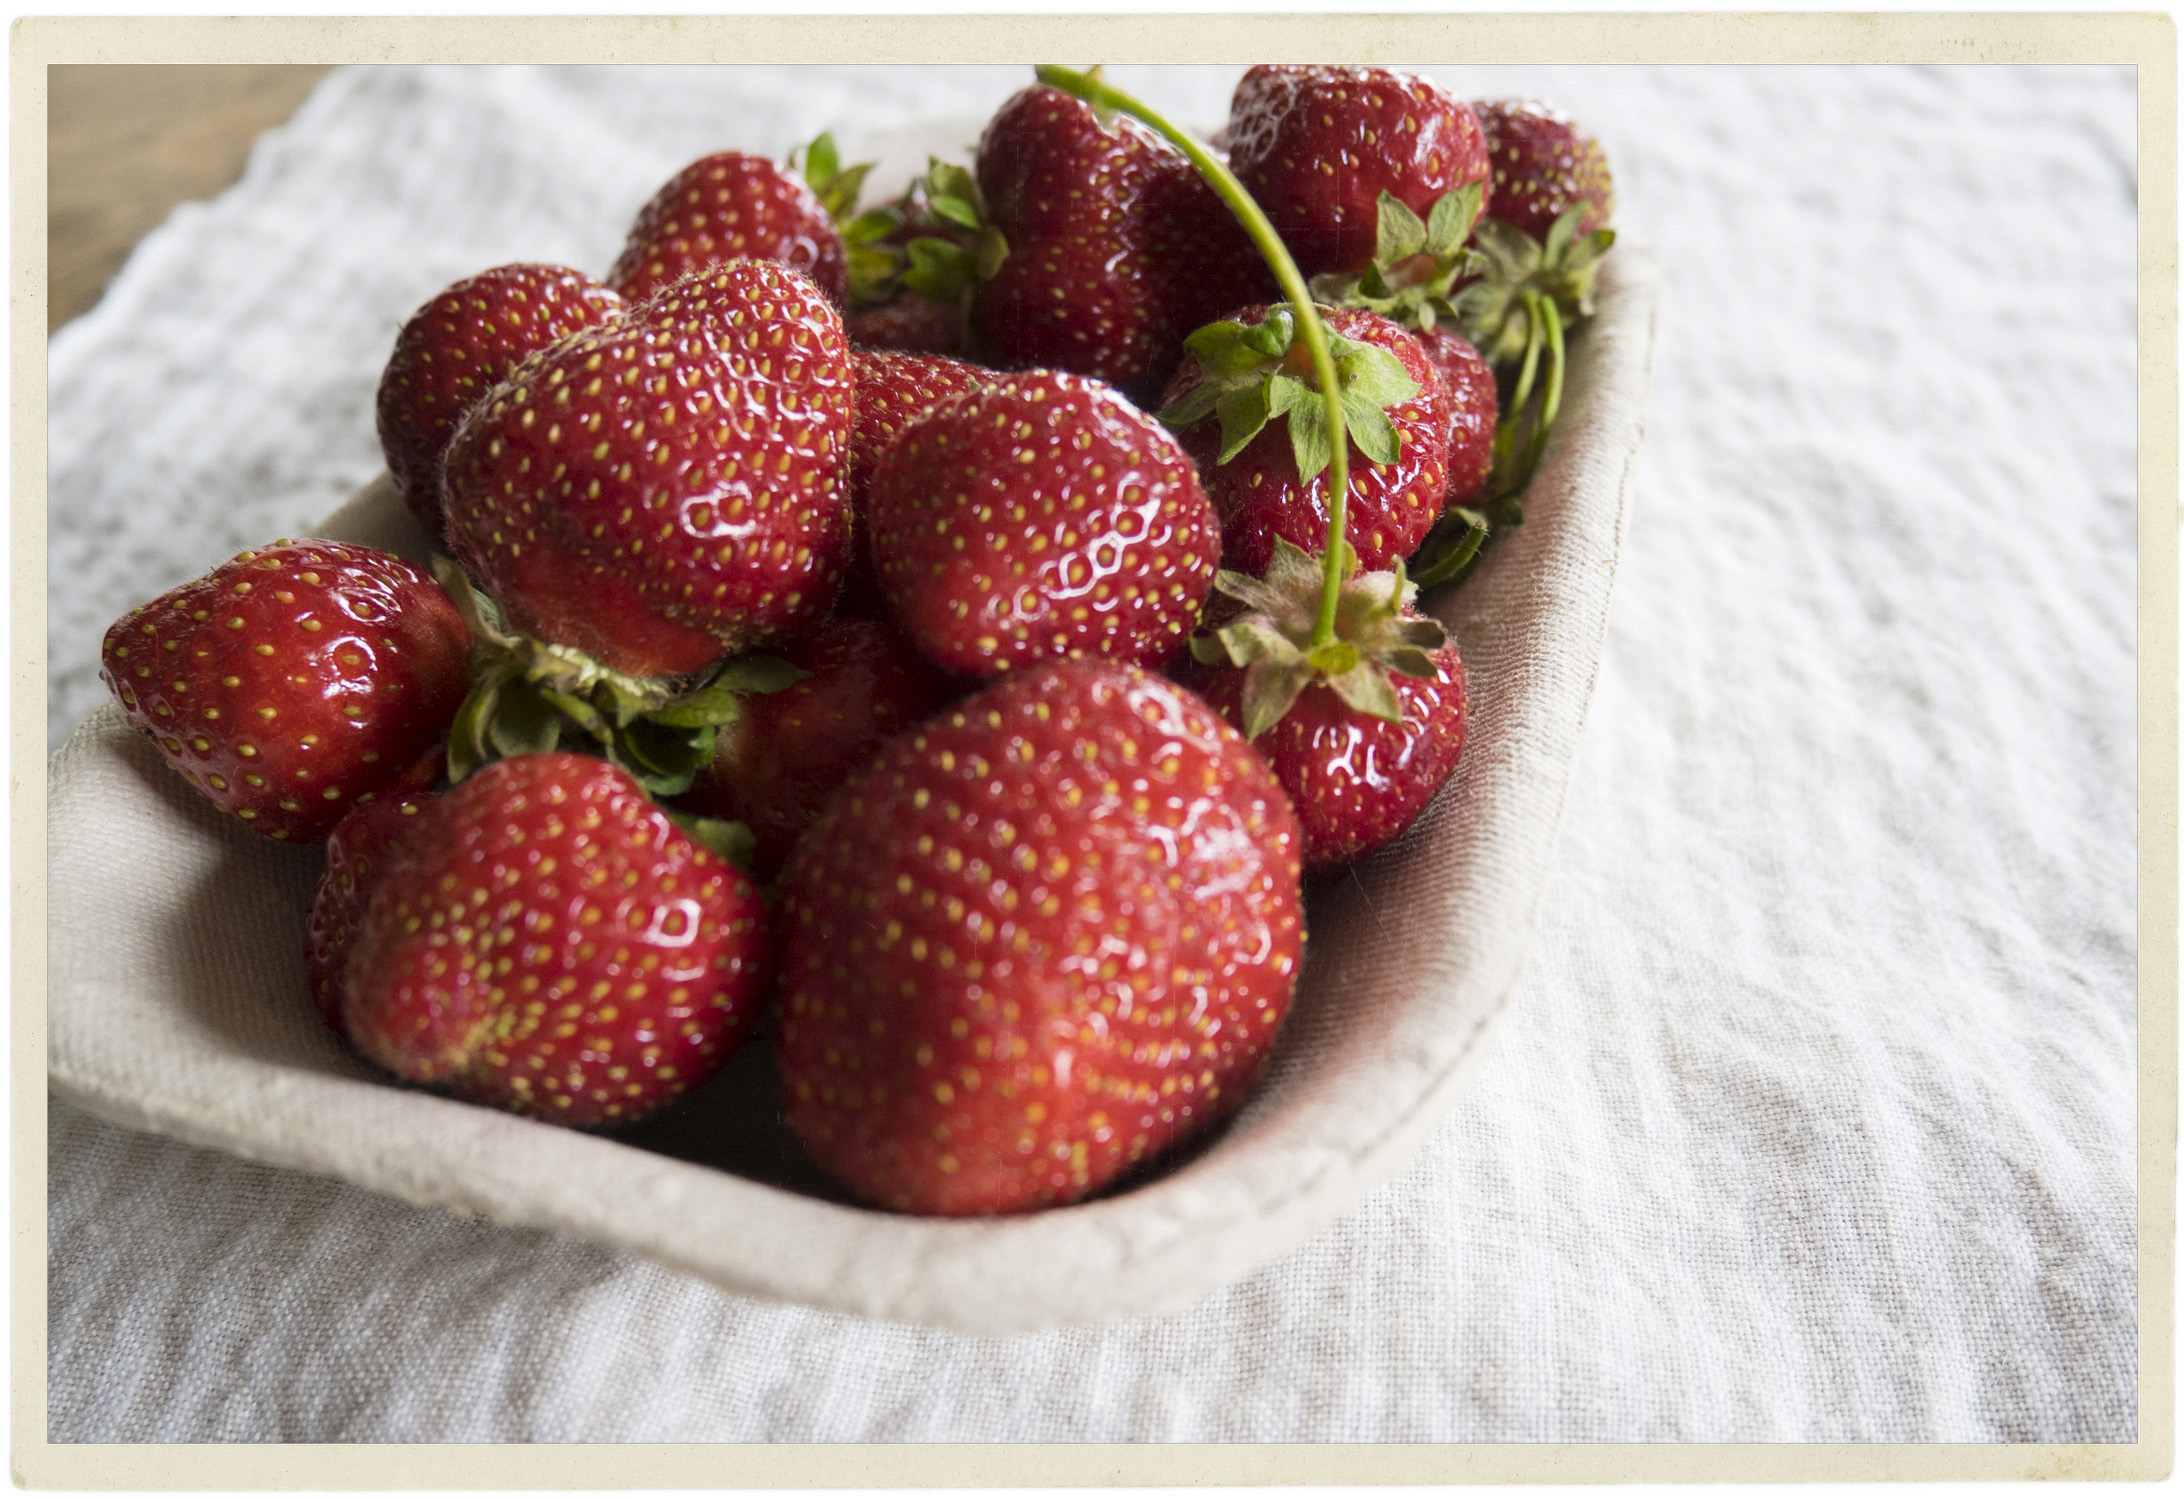 Strawberries seem to say "hello Summer, welcome back!"